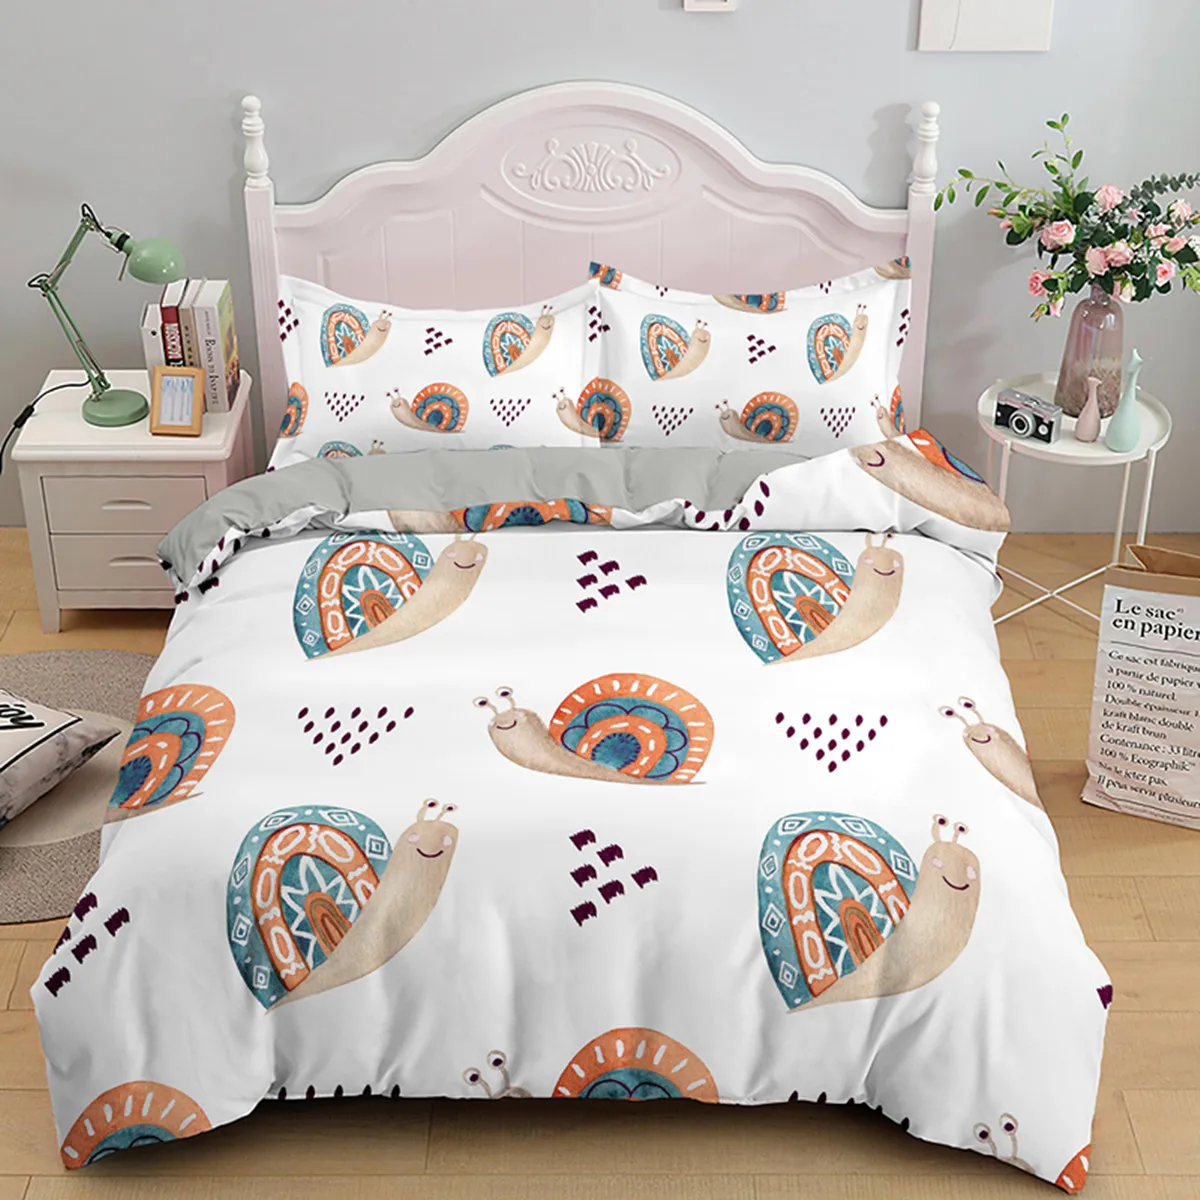 

Cartoon Snail Duvet Cover Colorful Animals for Kids Teens Women Wild Reptile Bedroom Decoration Polyester Quilt Cover Queen Size